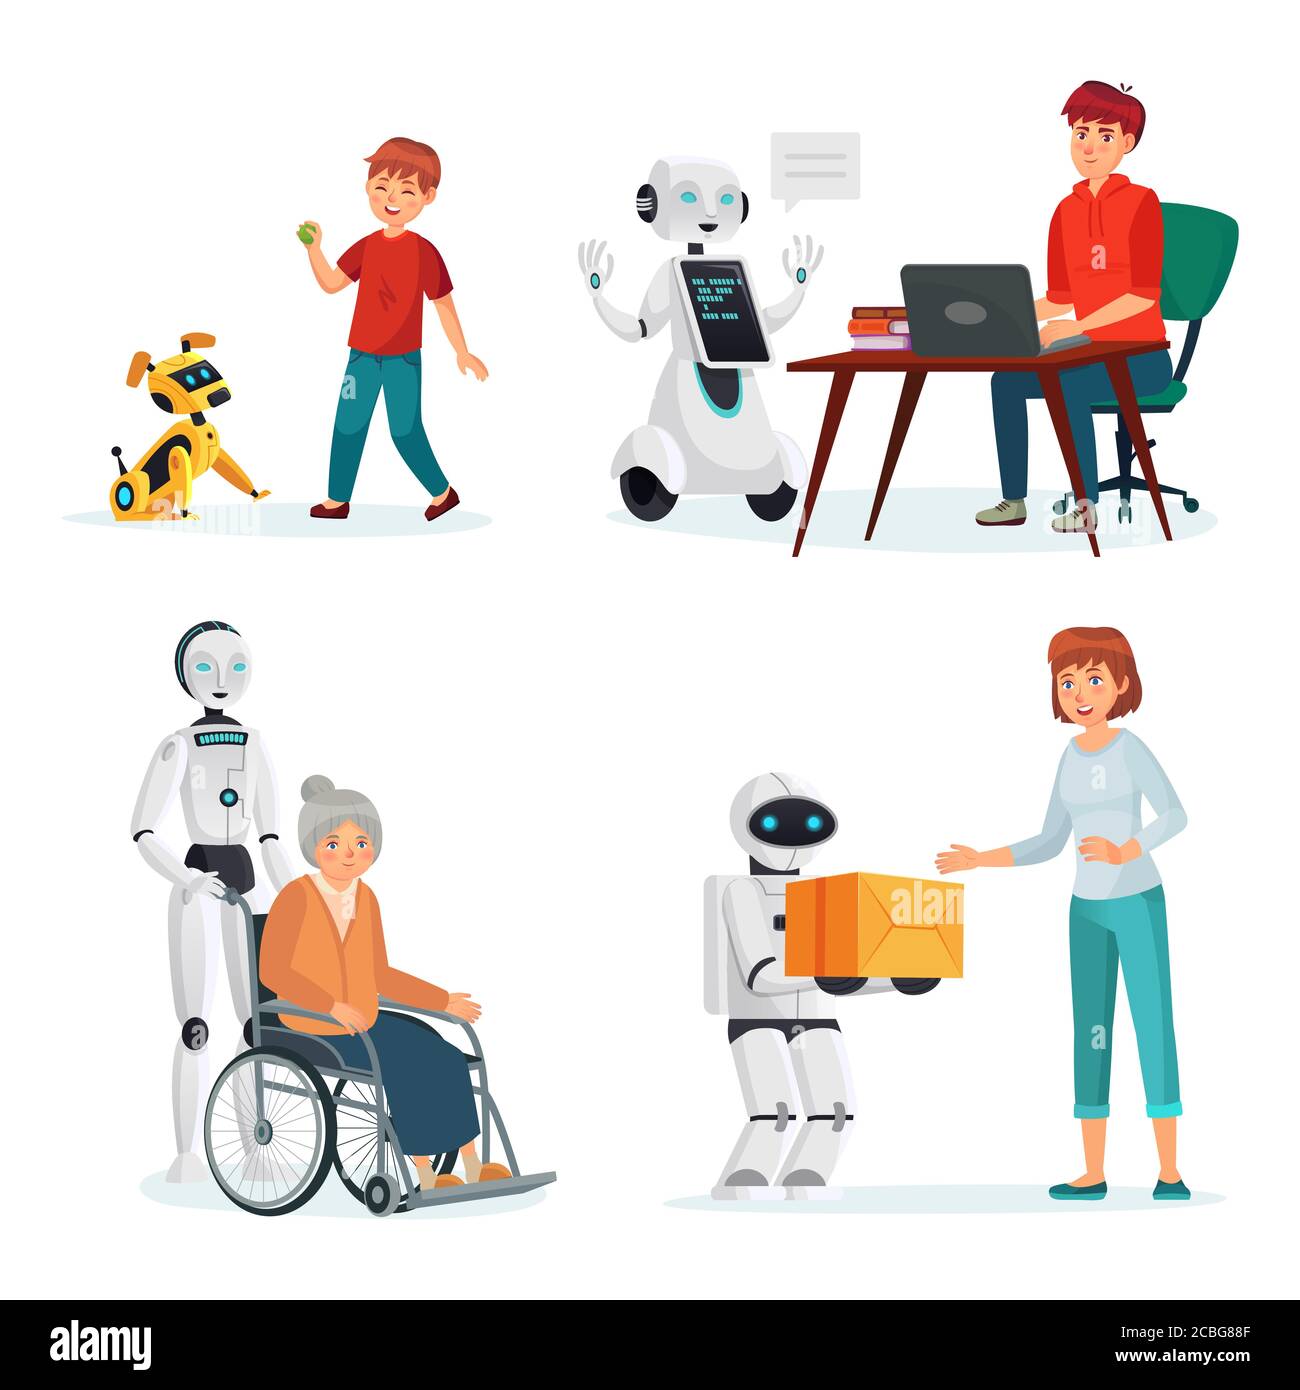 Robots interact with people in various situations Stock Vector